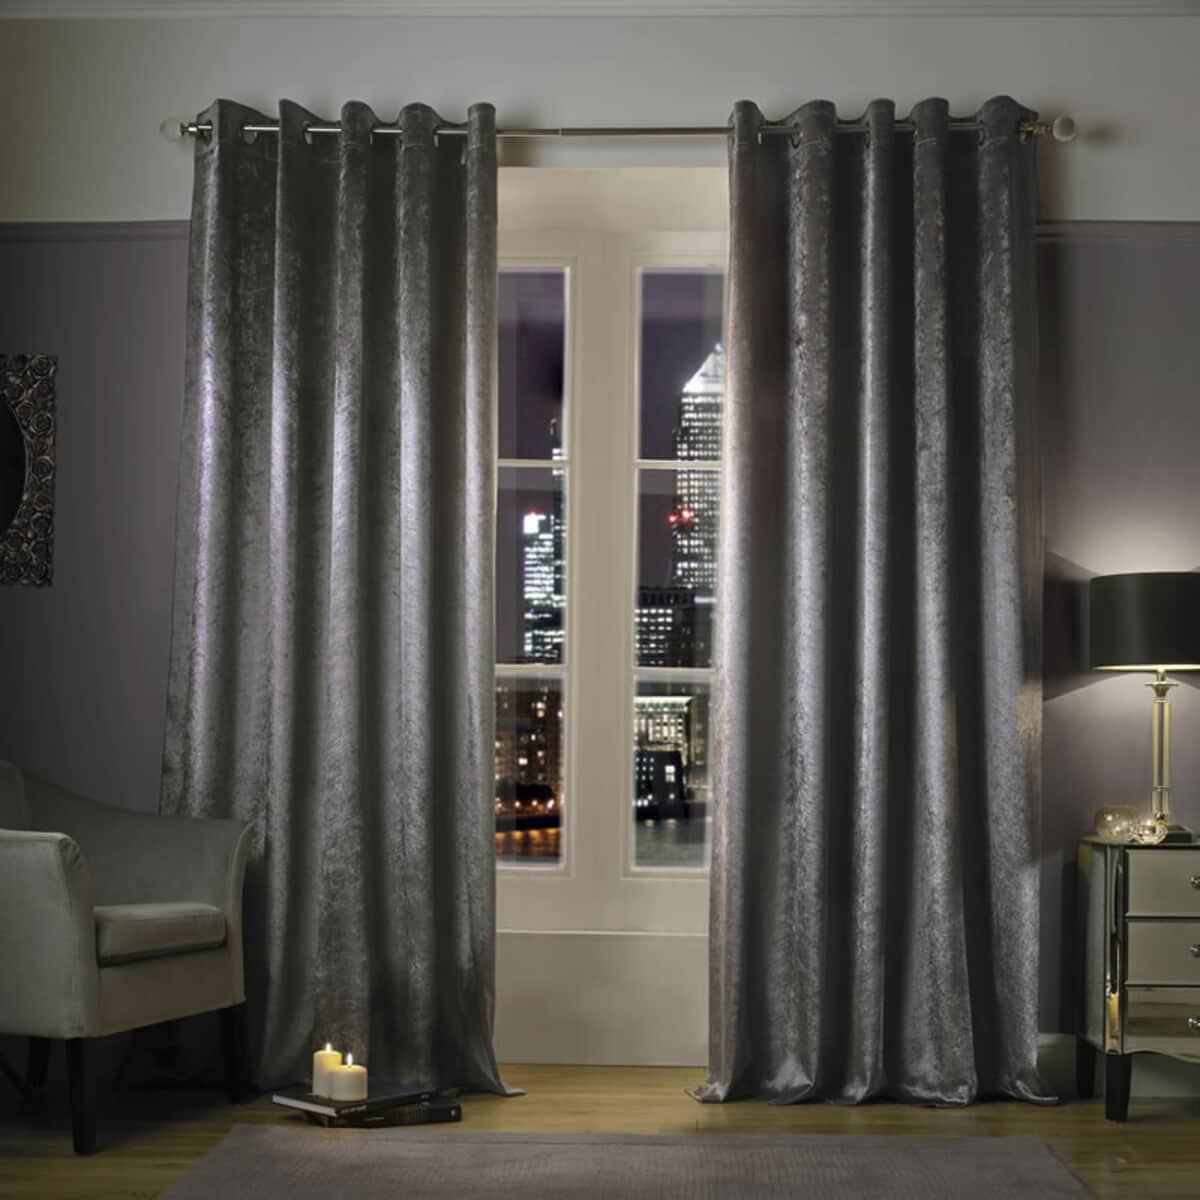 Kylie at Home Adelphi Truffle Curtains large